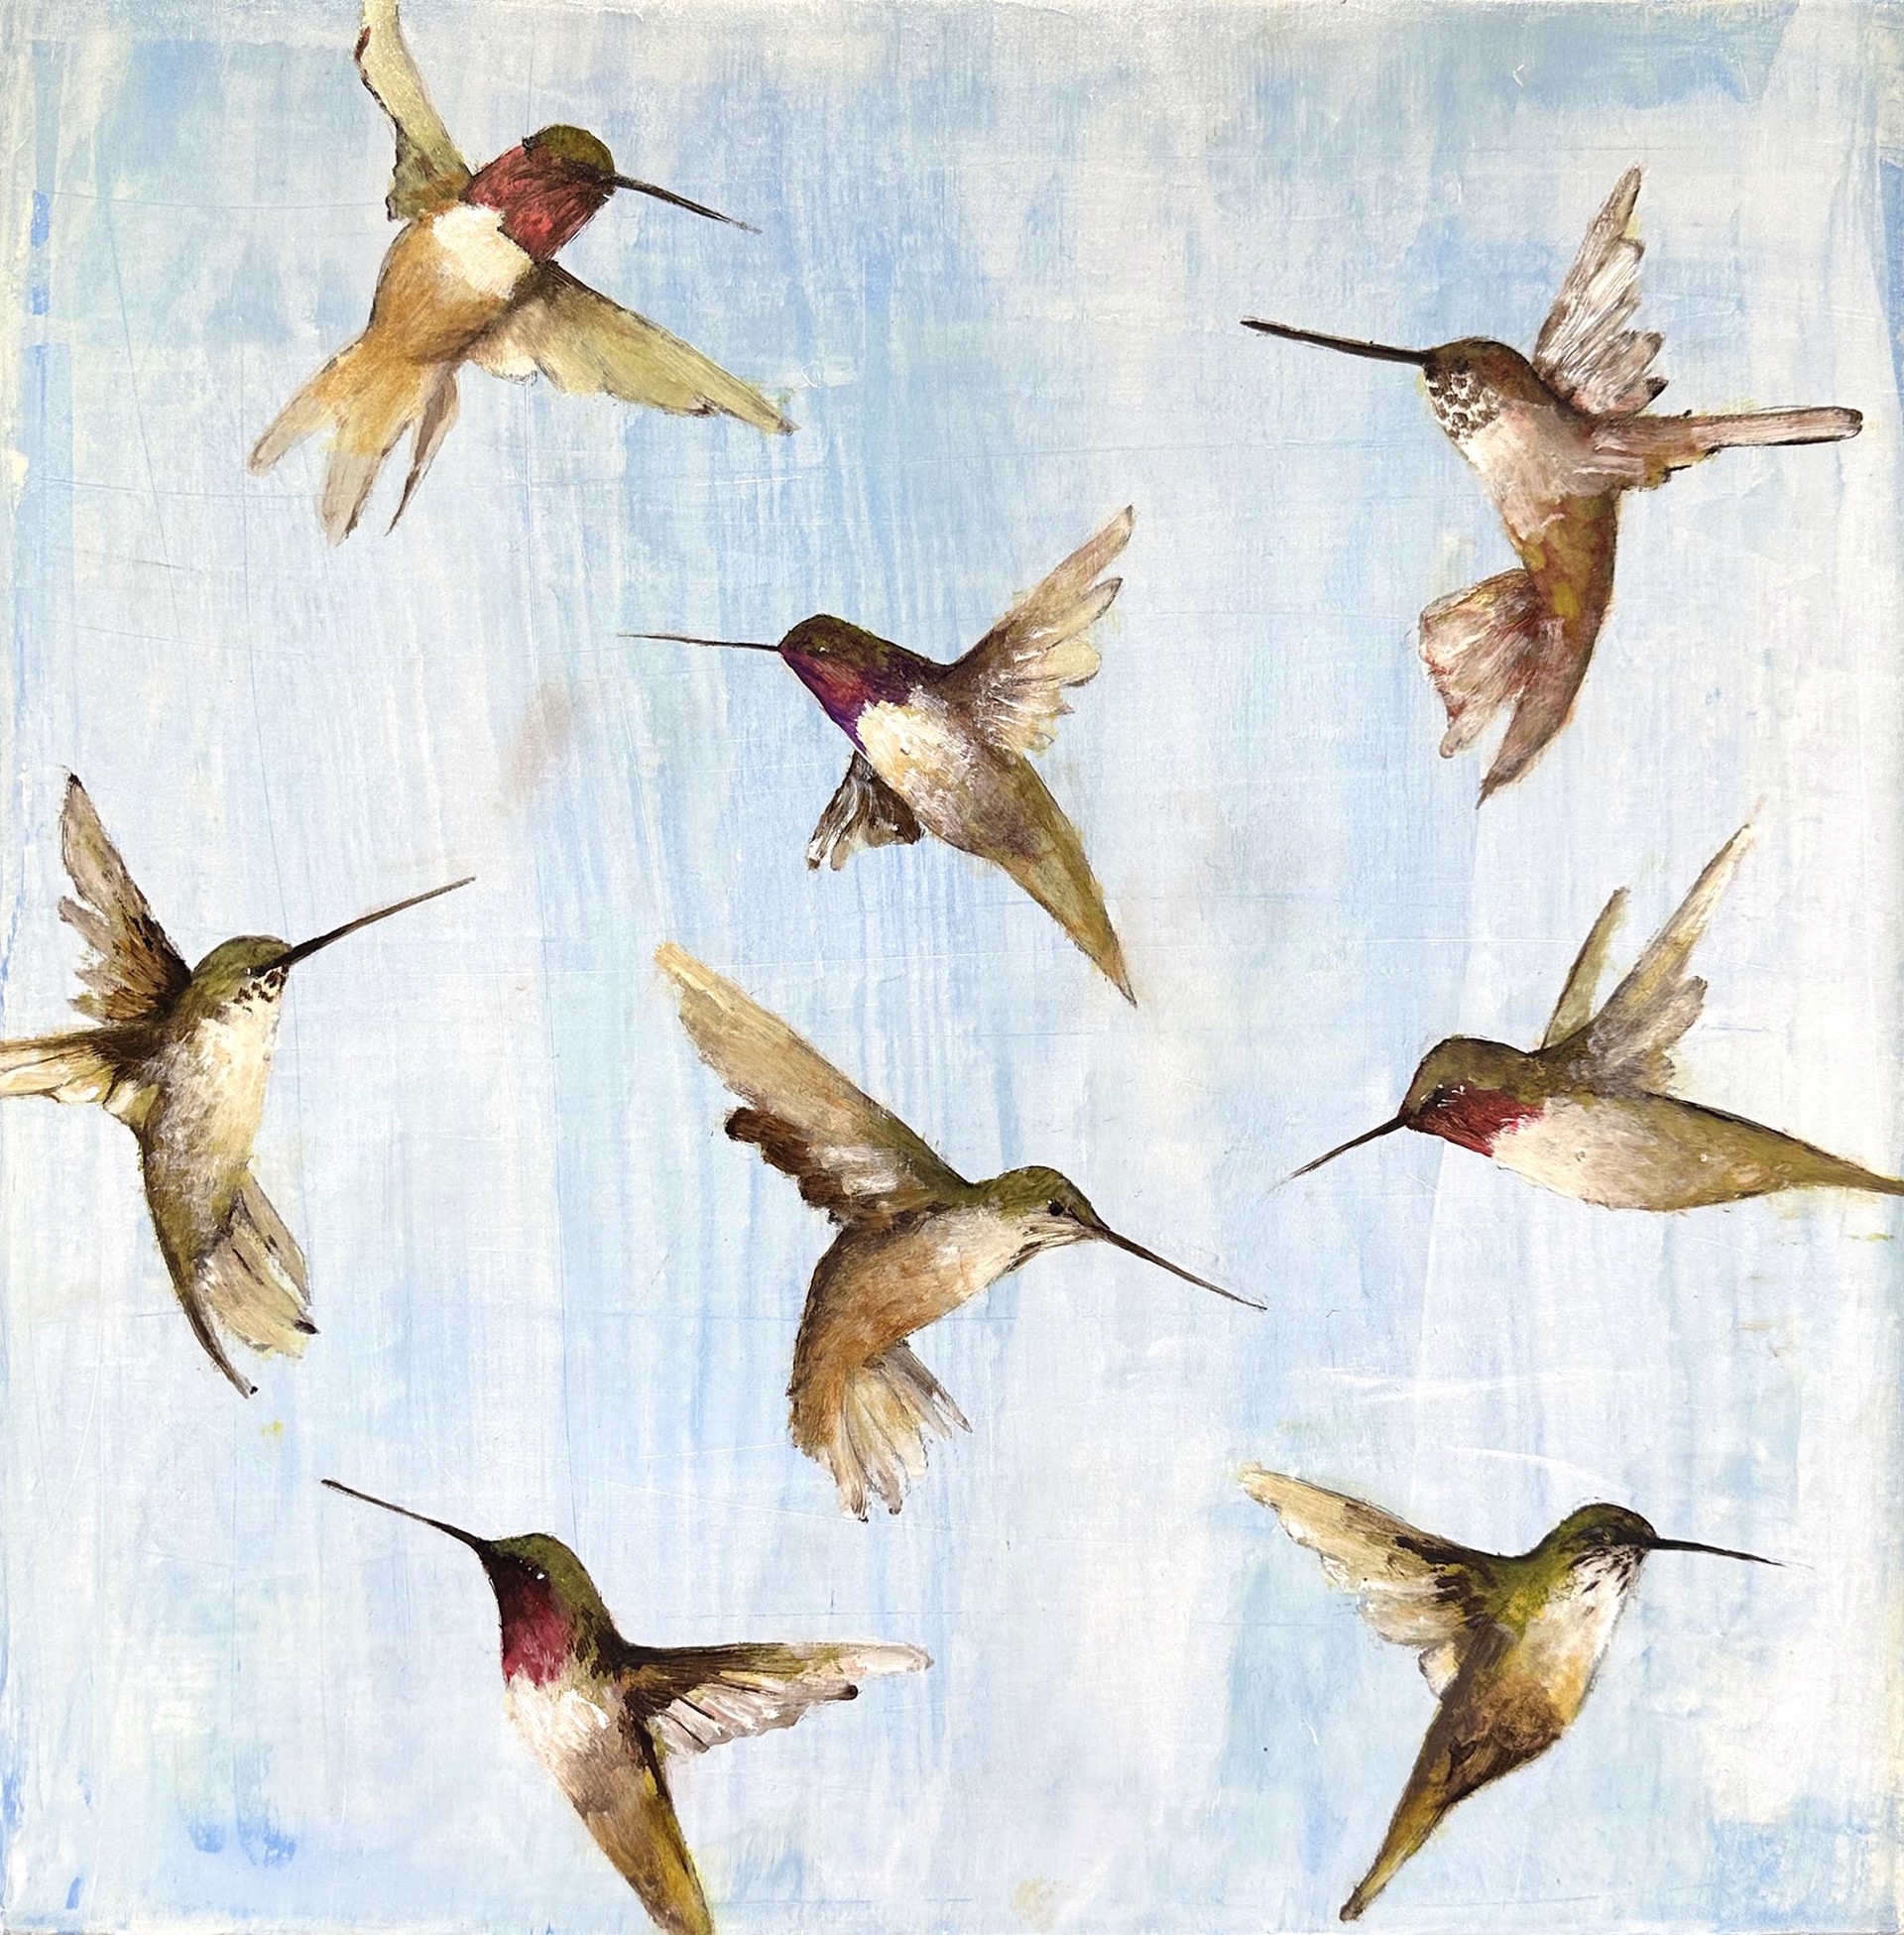 Original Oil Painting By Jenna Von Benedikt Featuring Hummingbirds On Abstract Blue Background